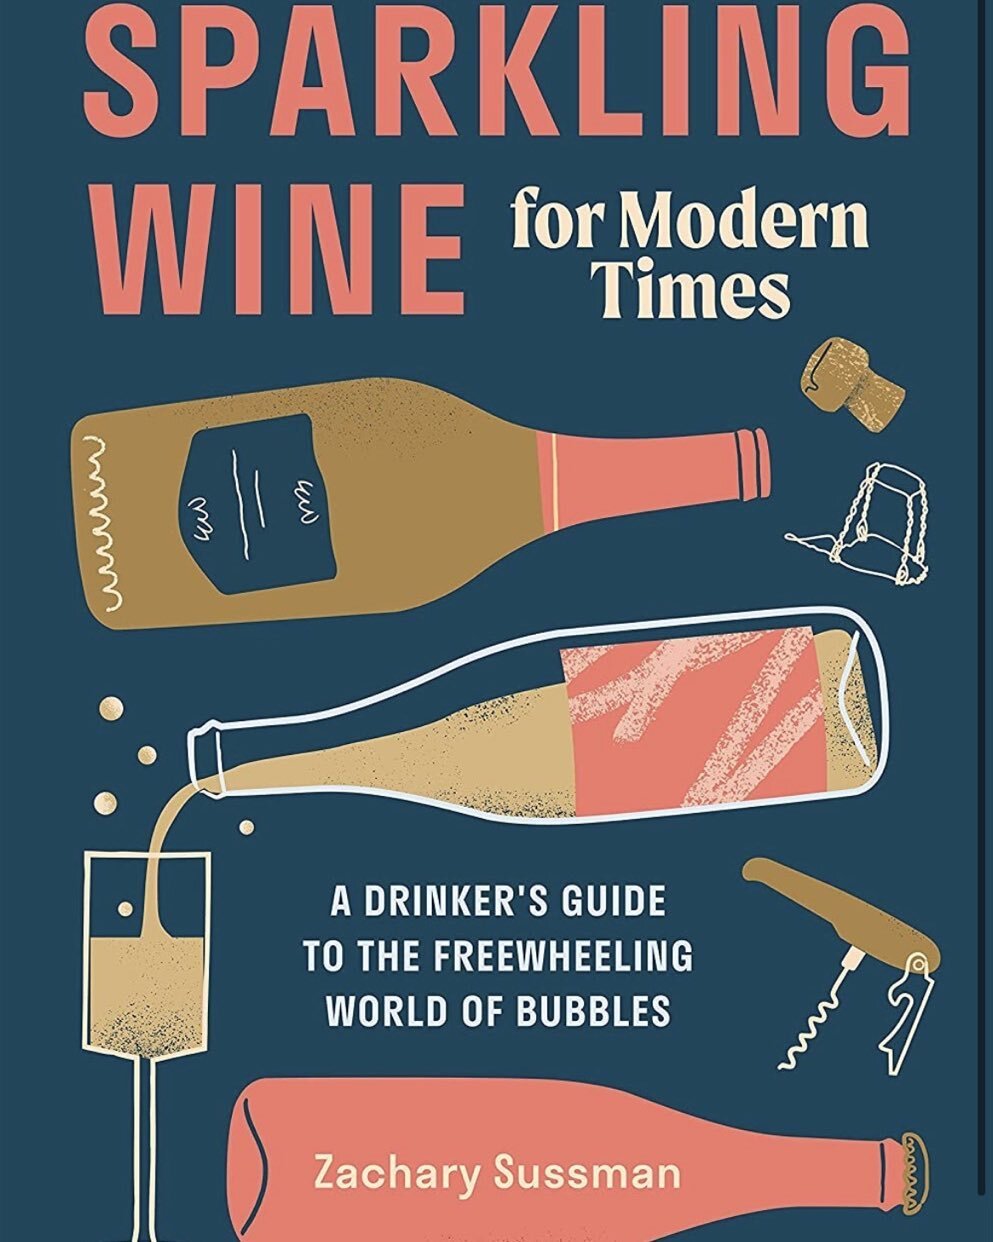 Sparkling Wine for Modern Times (forthcoming November 2, 2021 from @punch_drink and @tenspeedpress) is now available for pre-order. Link in bio! #sparklingwine #bubbles #wine